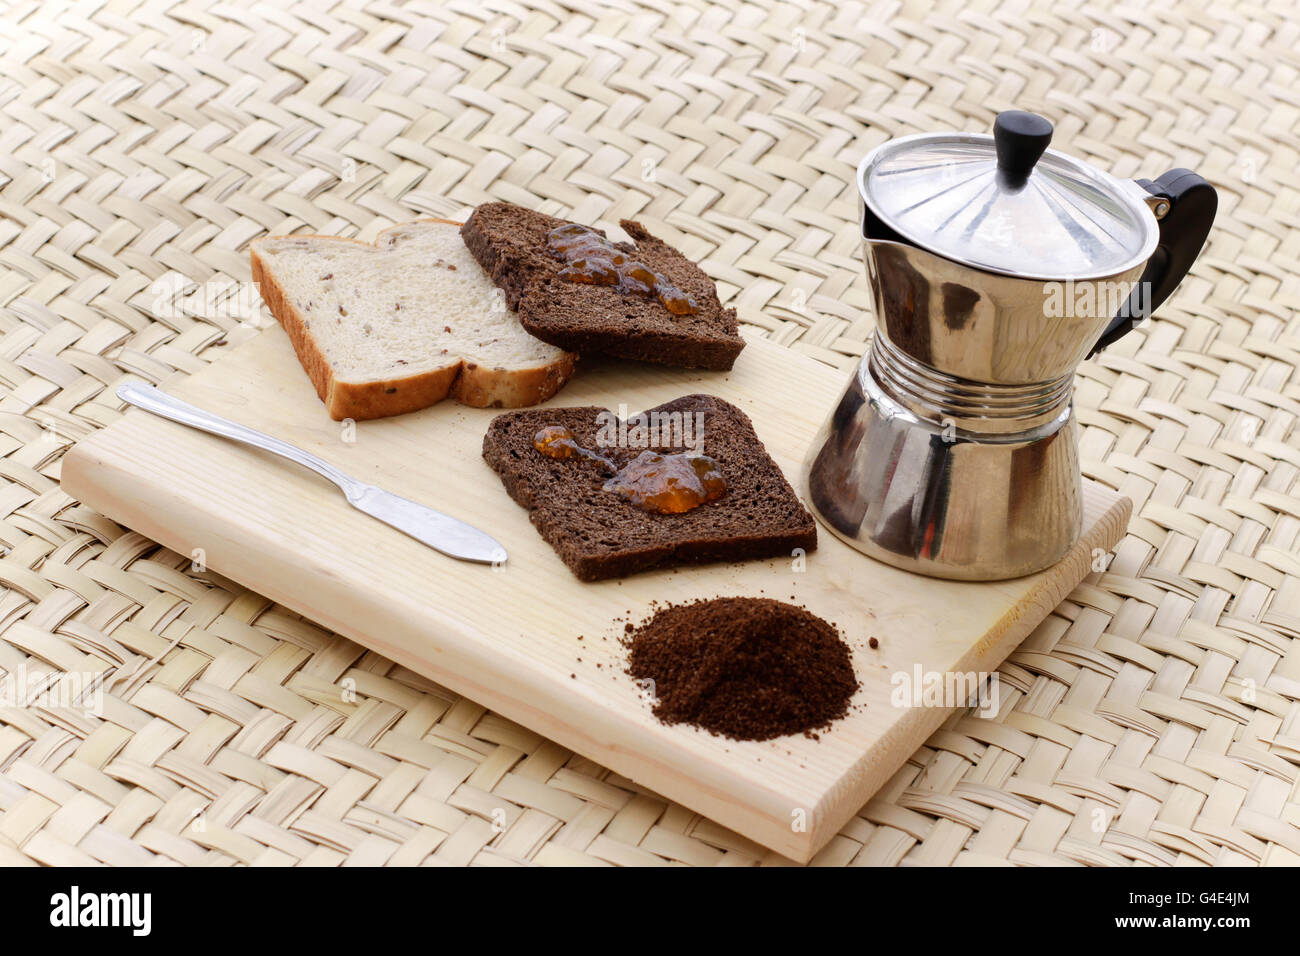 Photograph of some toasted bread with marmalade and other ingredients Stock Photo